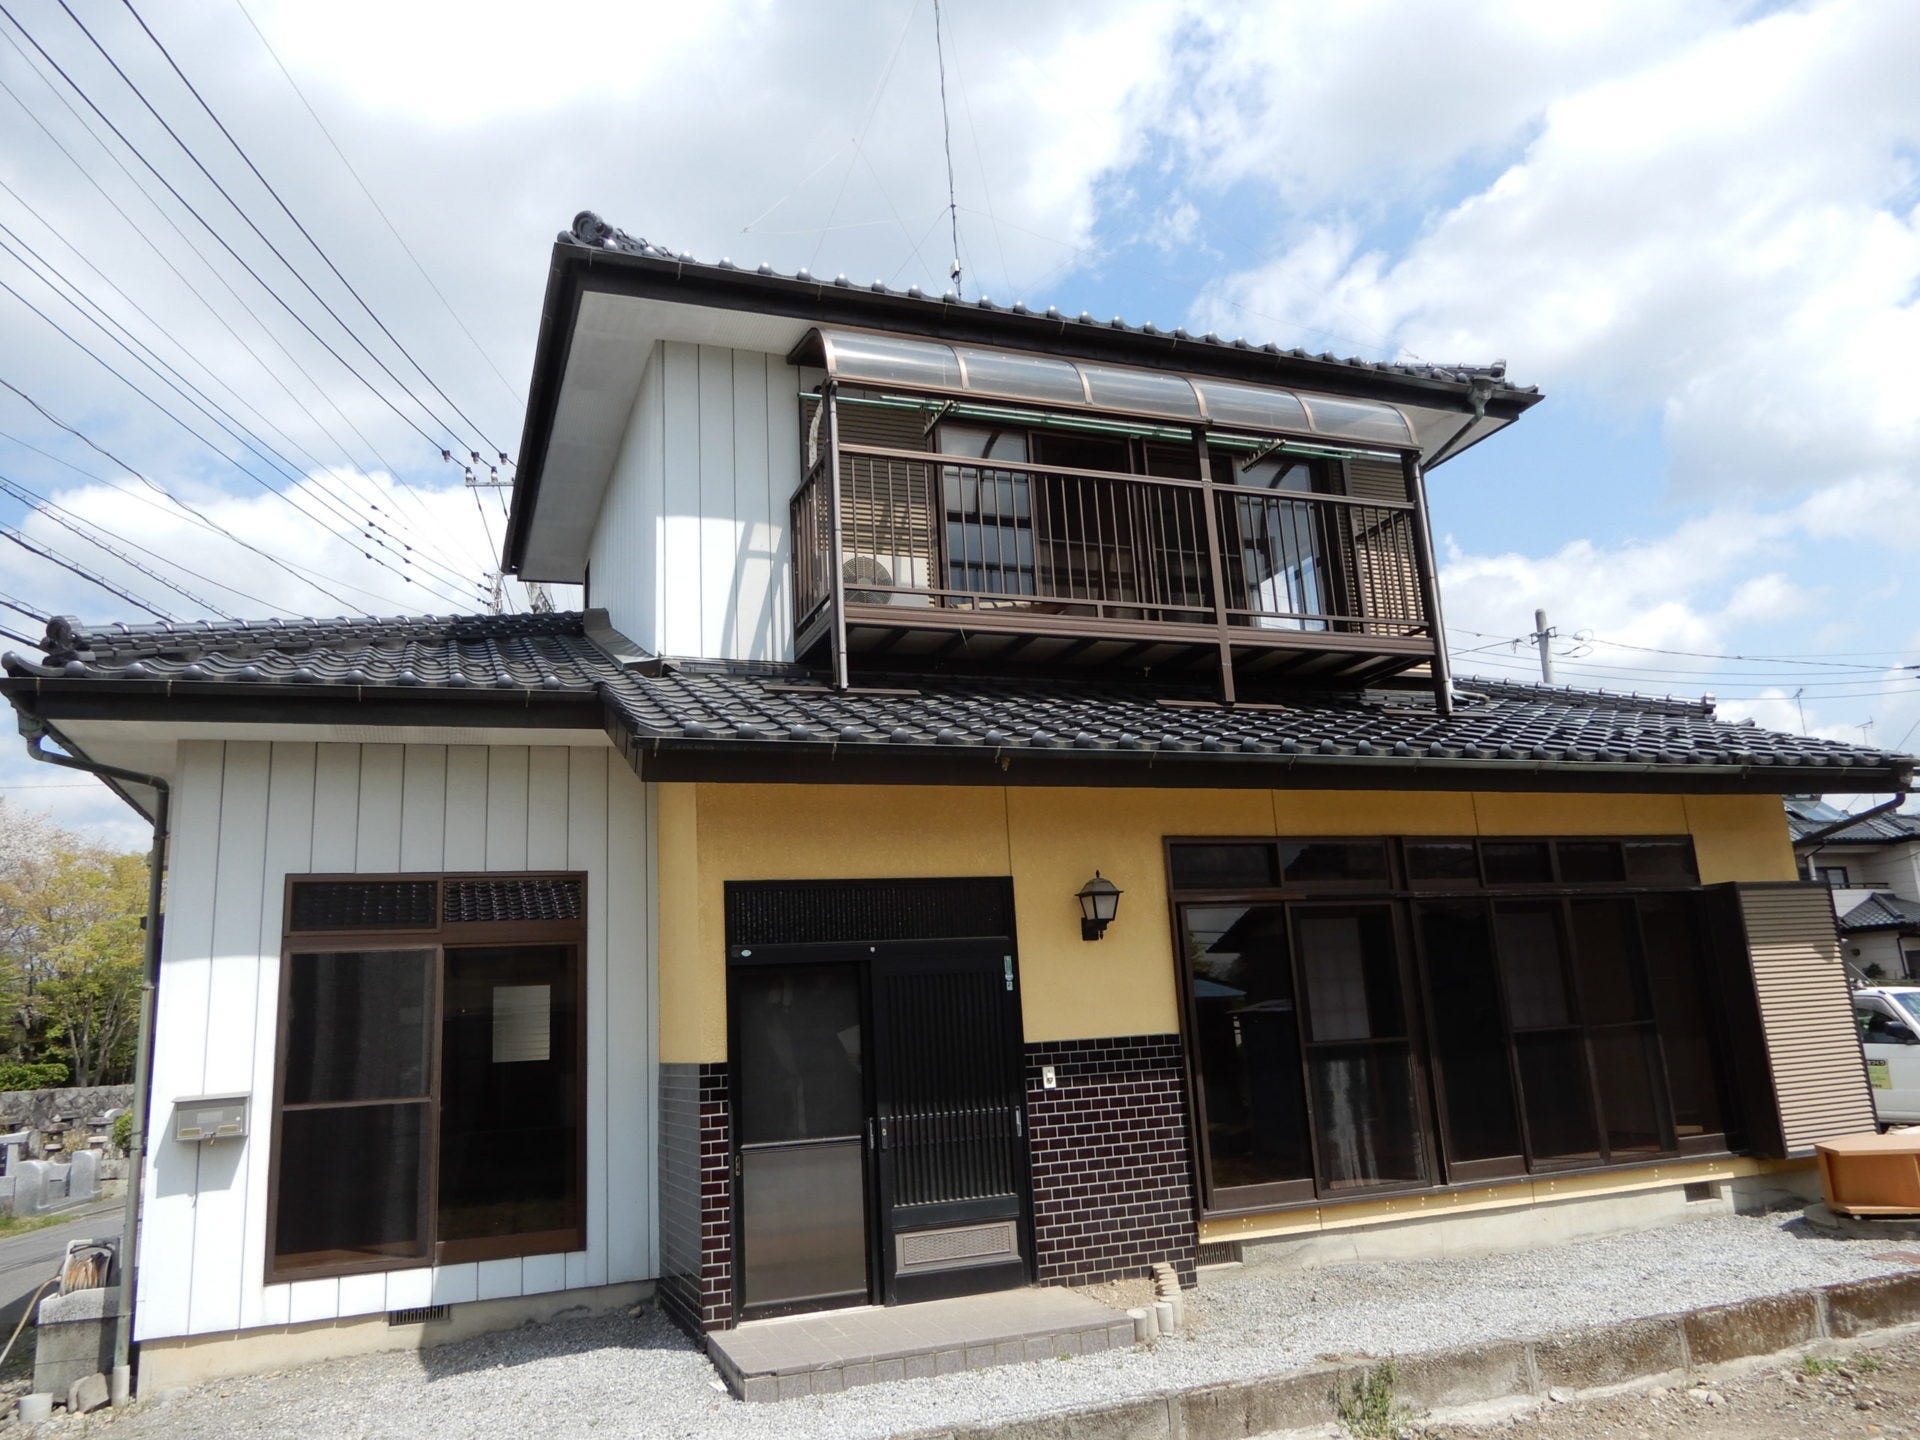 There are more than 8 million empty homes in rural Japan, and local